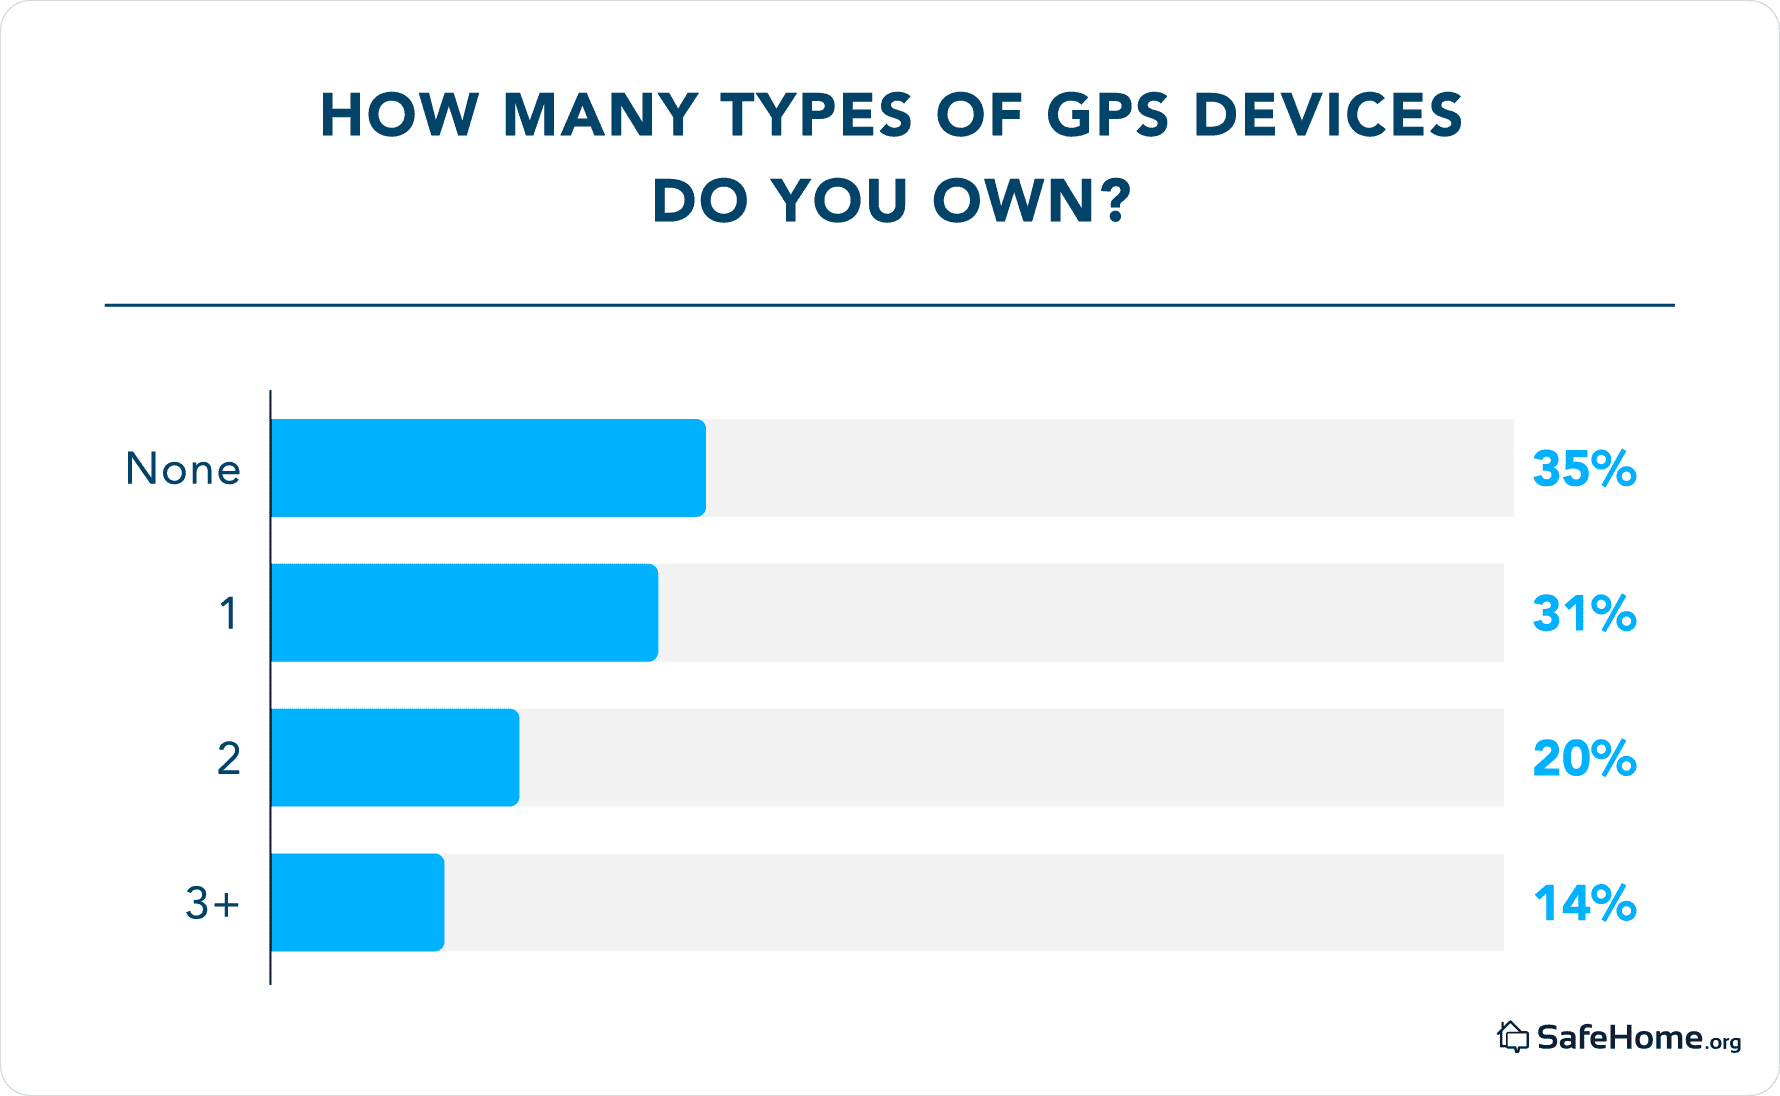 How many types of GPS devices do you own